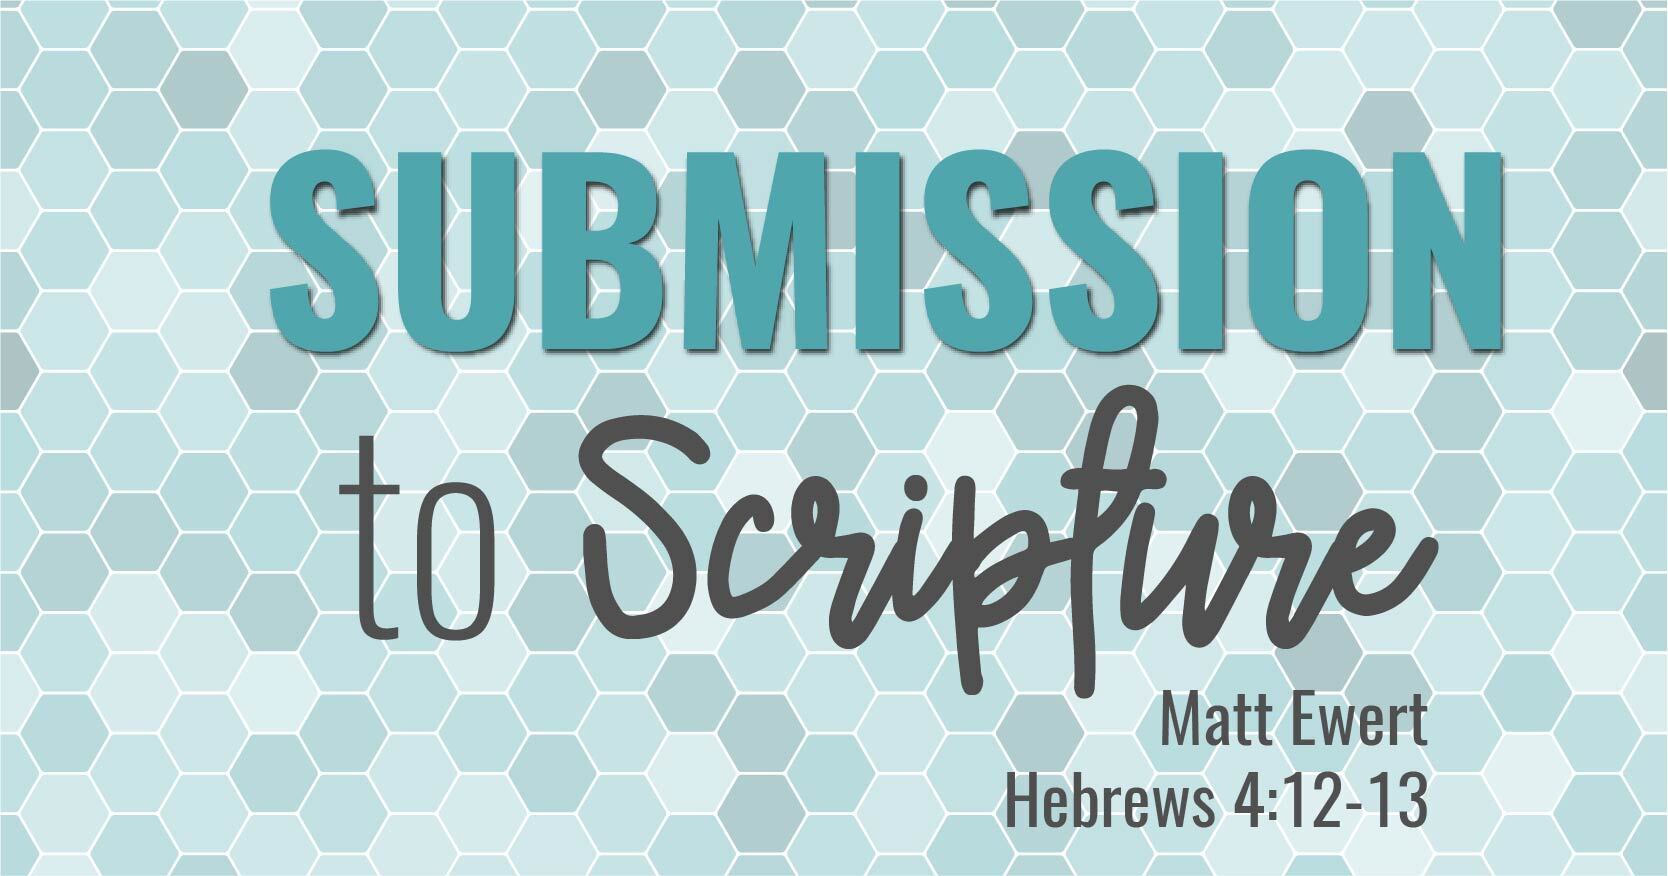 Submission to Scripture